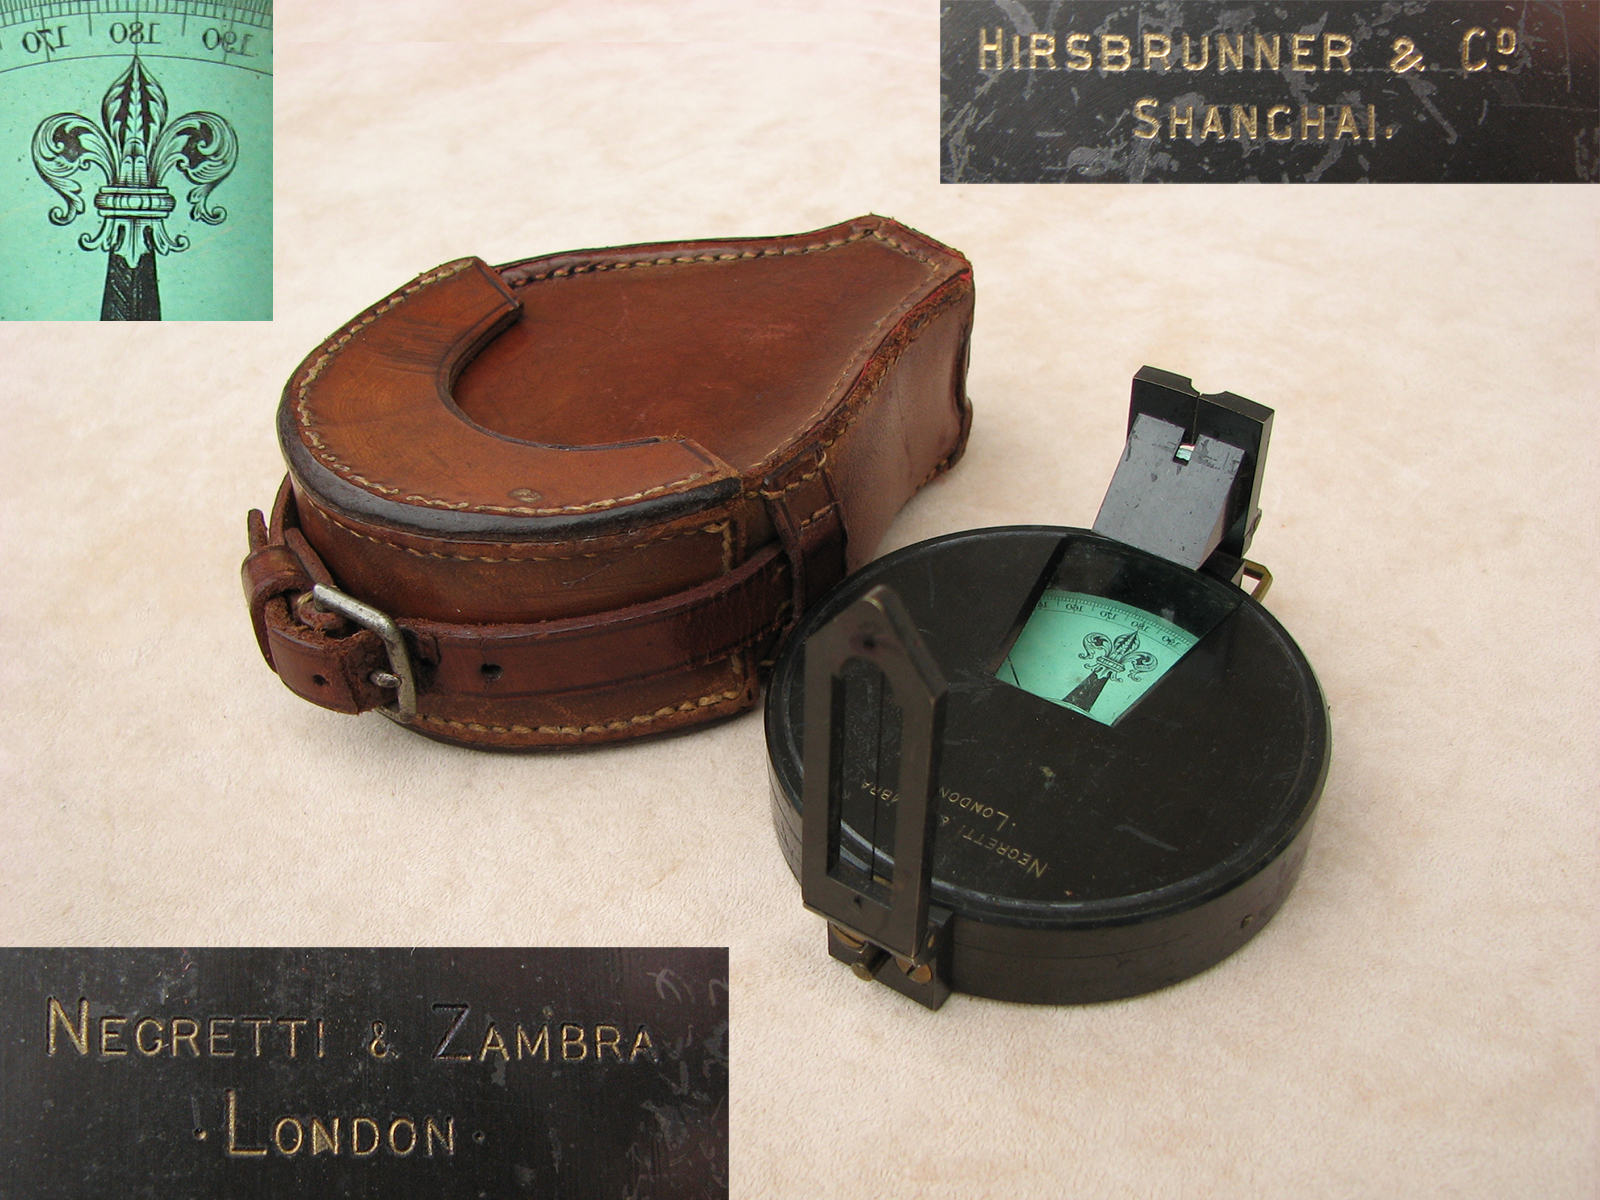 19th century Negretti & Zambra prismatic compass retailed by Hirsbrunner & Co Shanghai